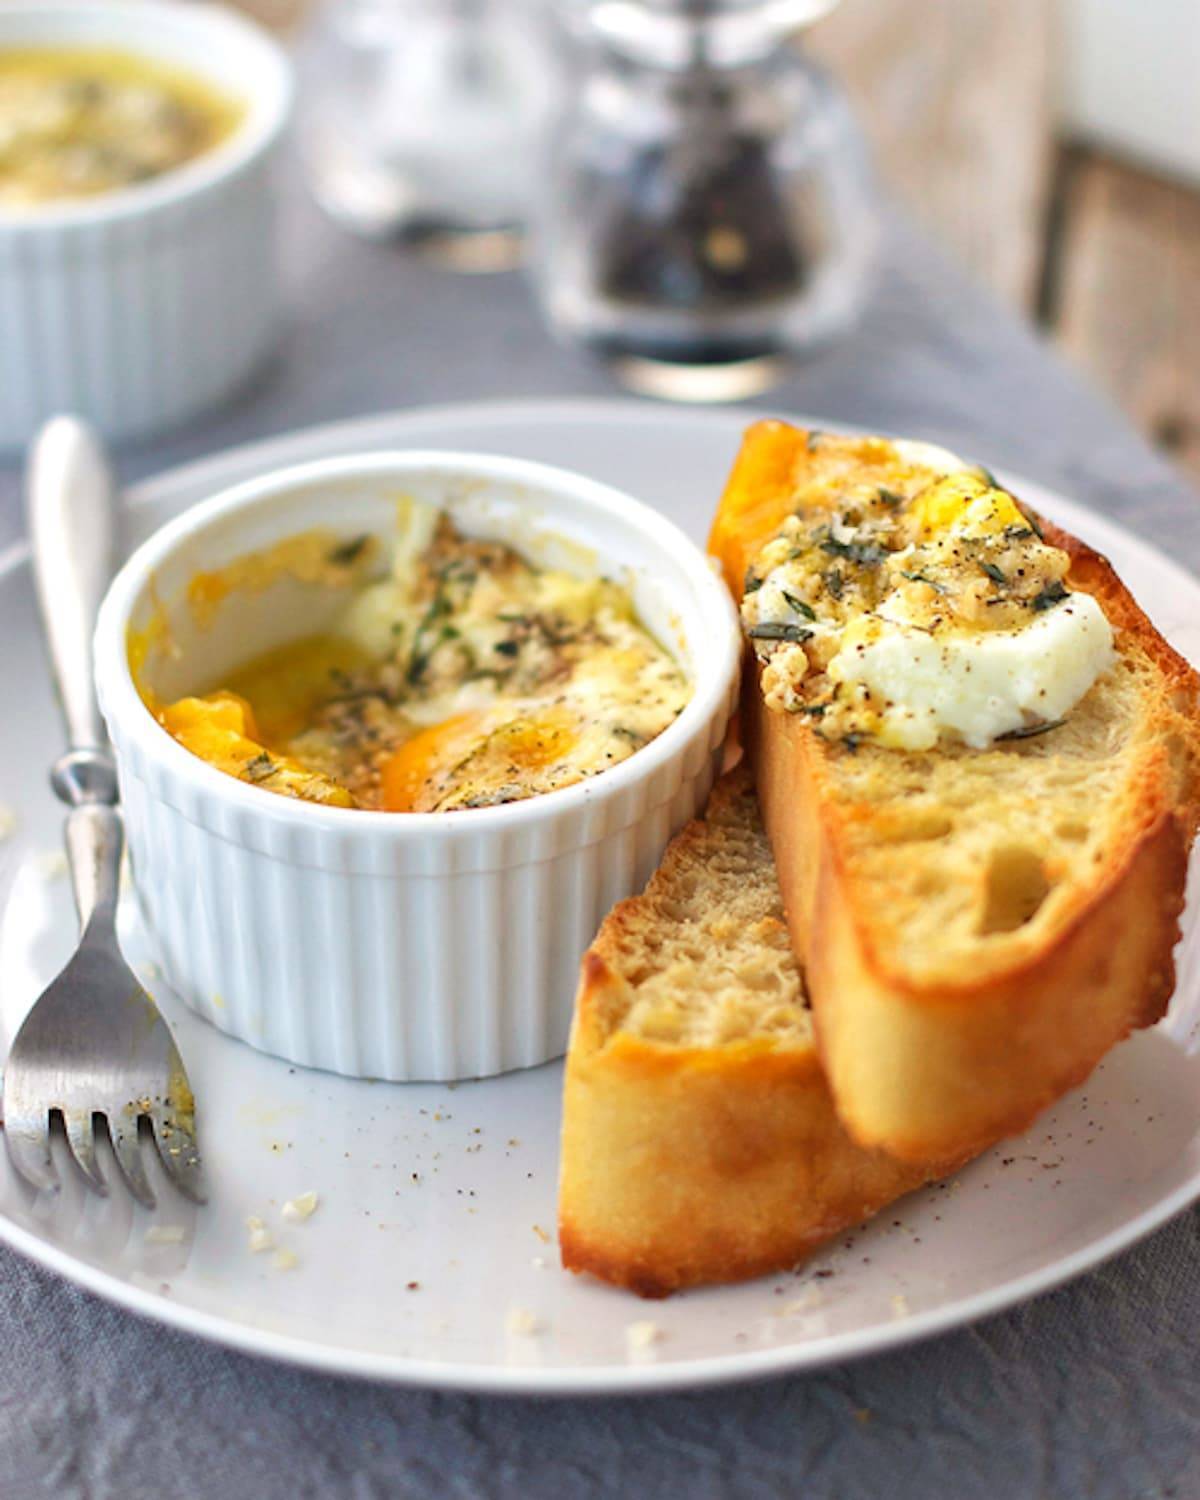 Parmesan Baked Eggs Recipe - Pinch of Yum